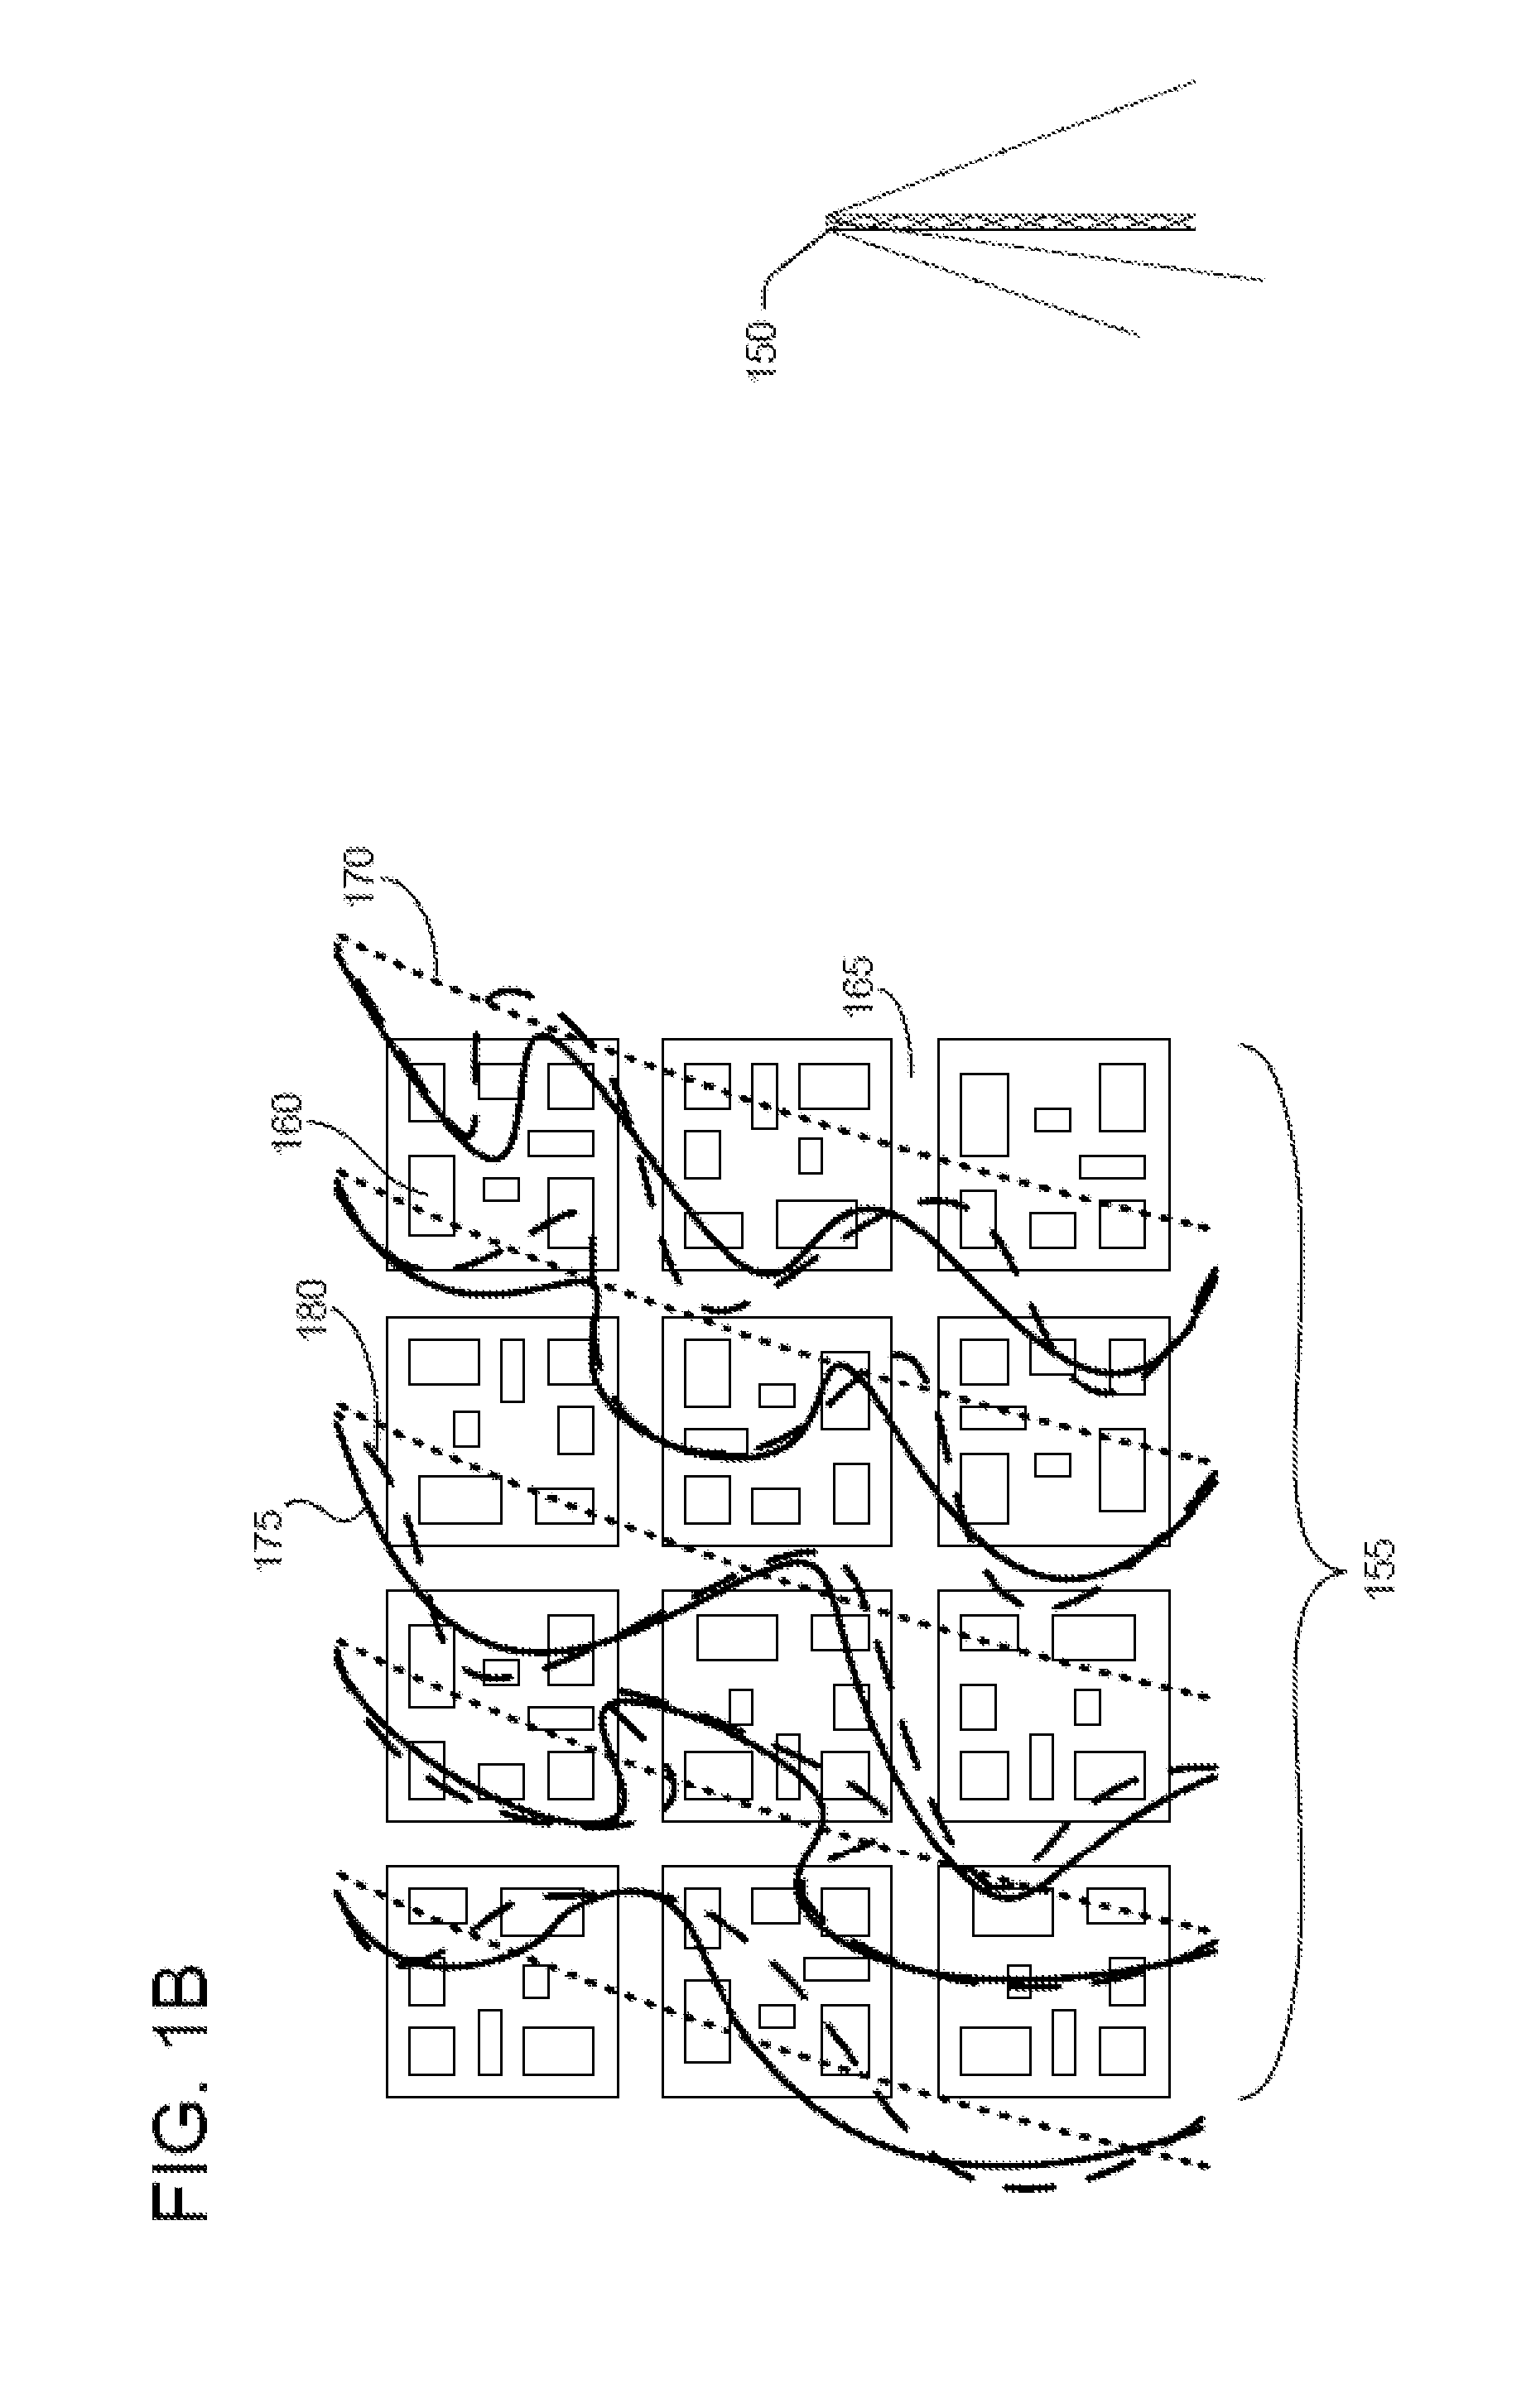 Method of near-field electromagnetic ranging and location